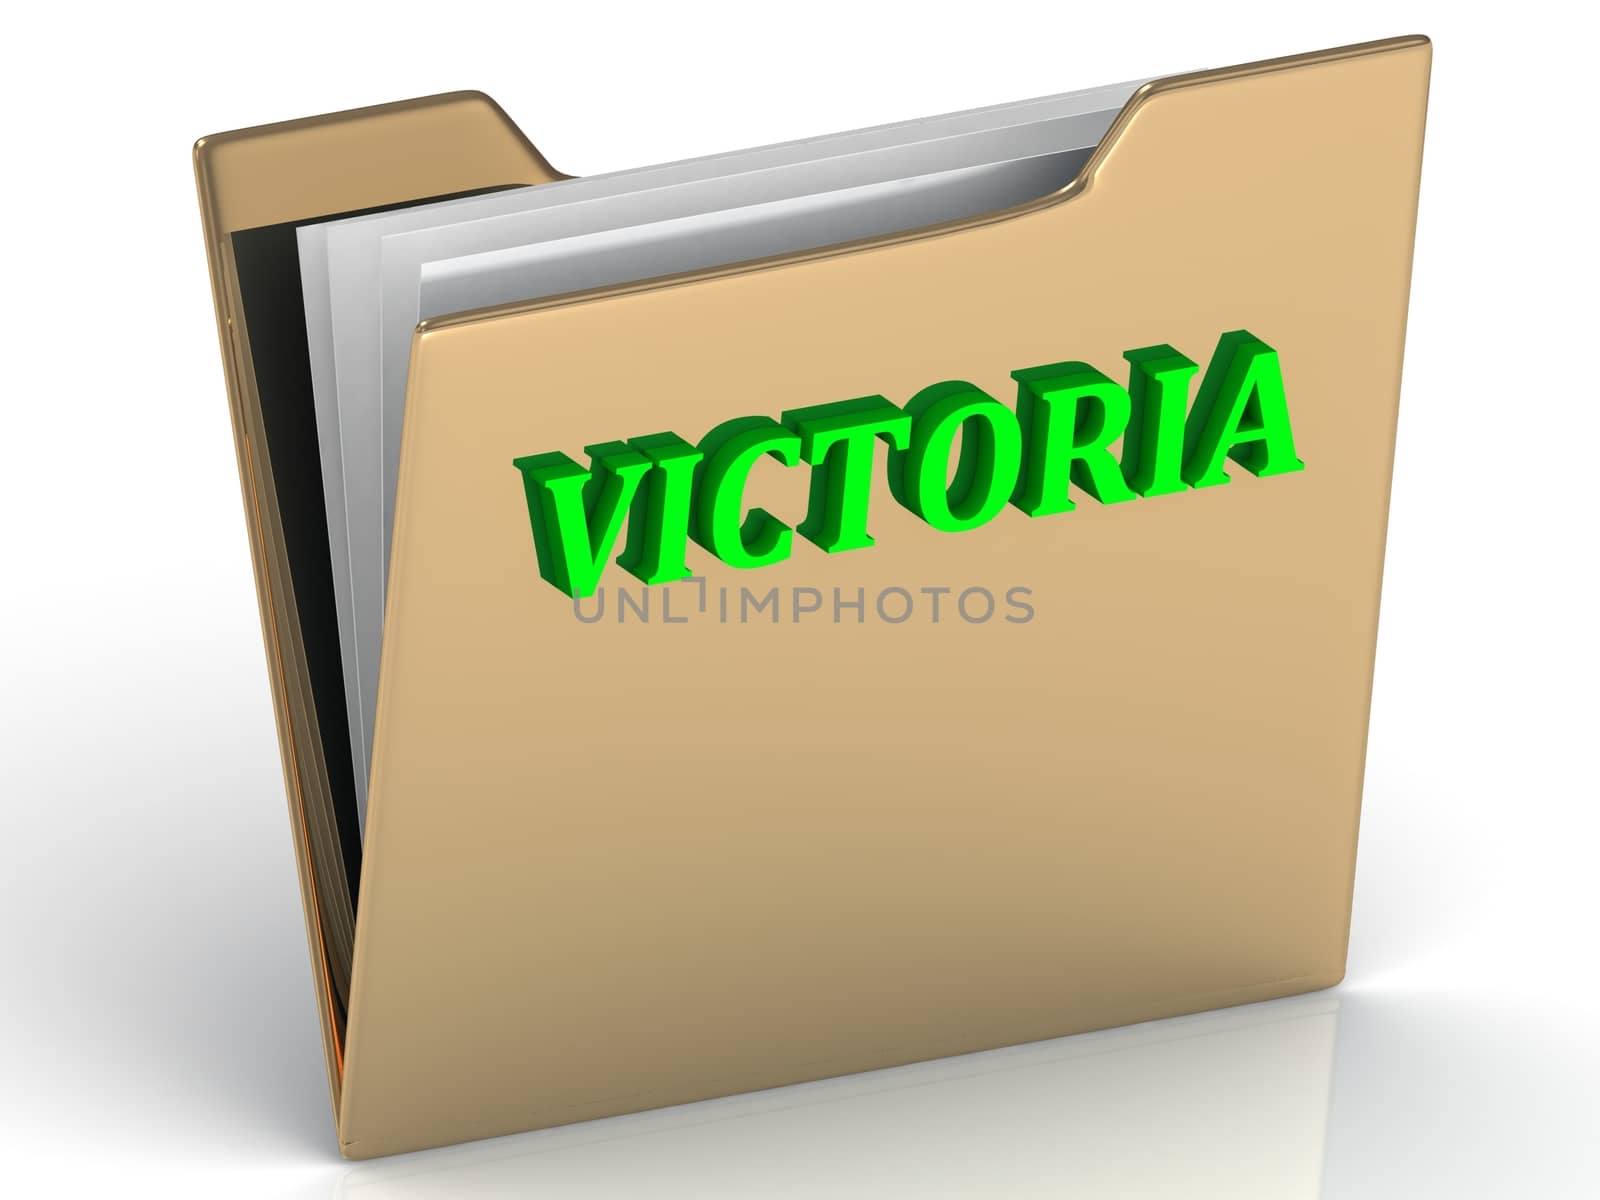 VICTORIA- bright letters on a gold folder on a white background